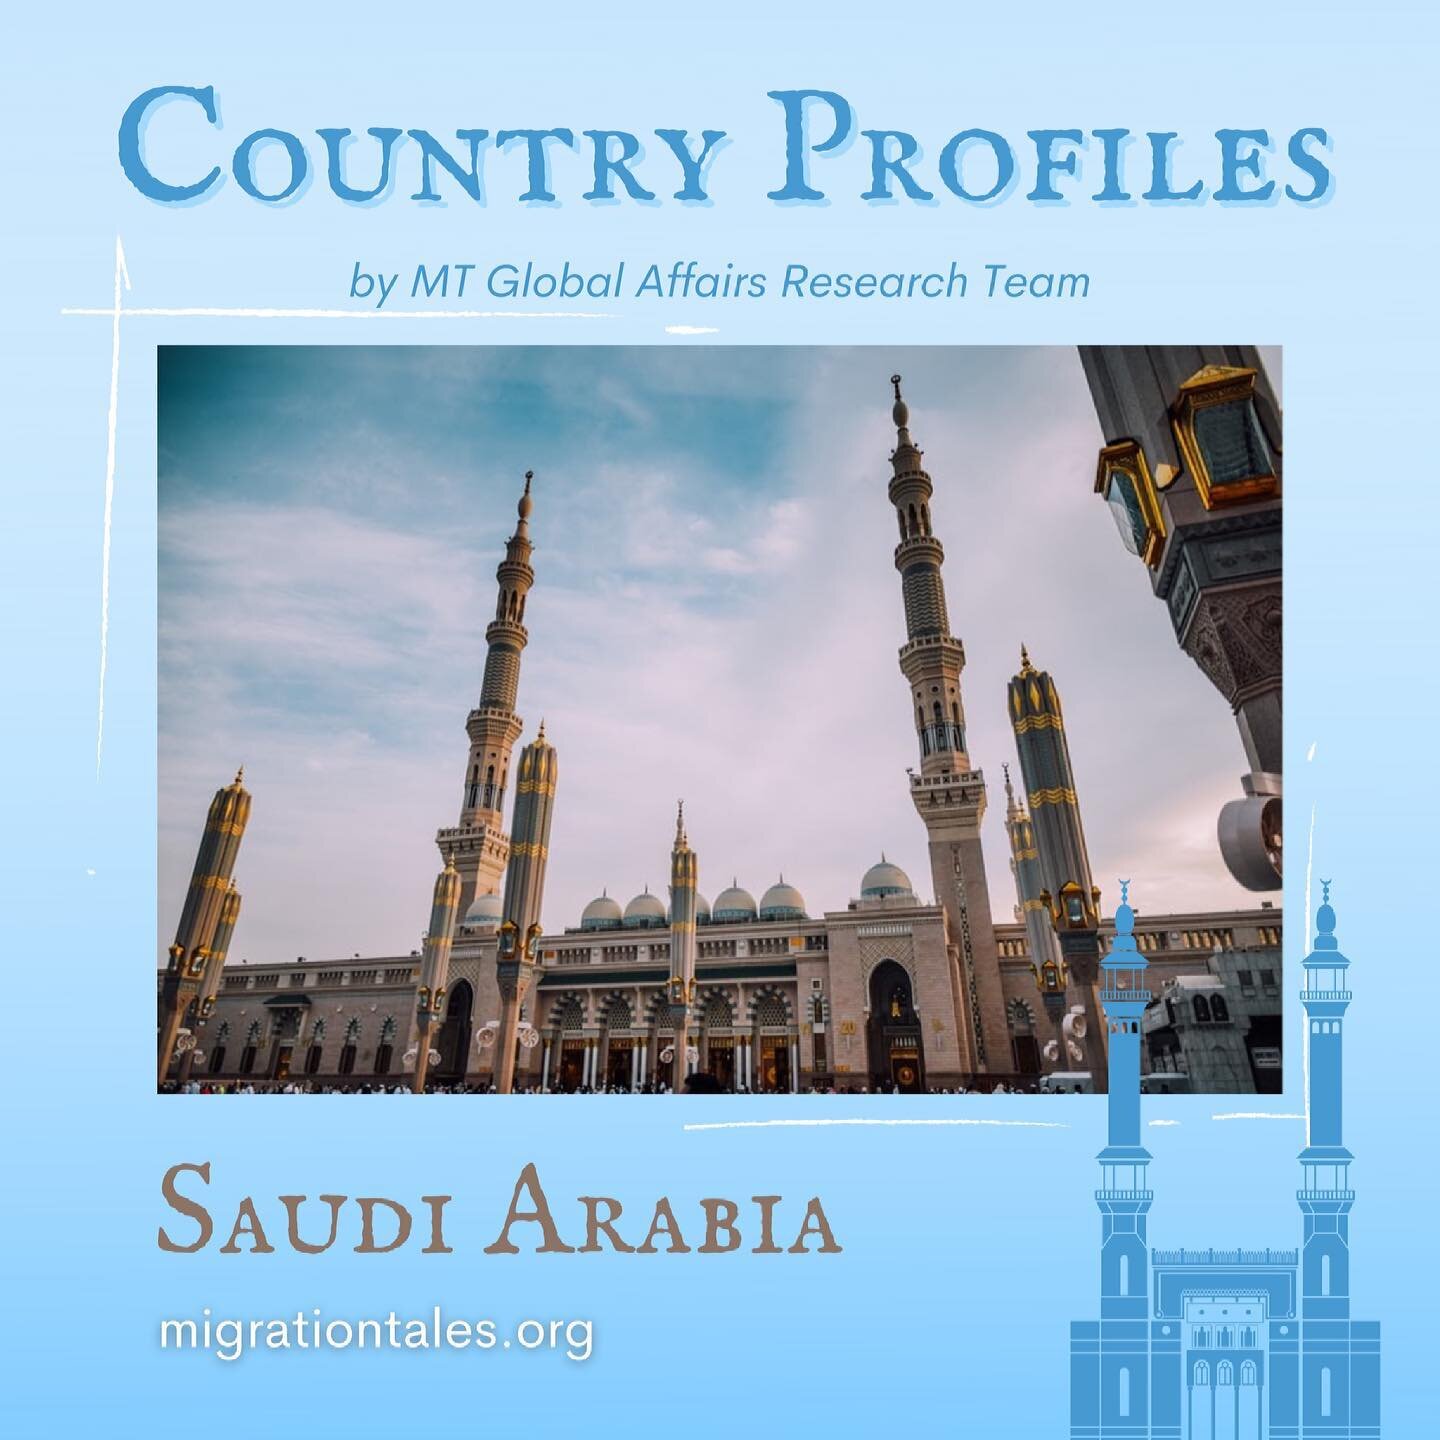 🦋 Thank you for all your support on our US Country Profile yesterday! 🌎

Our second Country Profile is already up on Saudi Arabia 🇸🇦

Make sure to explore our website to read the inspiring stories of #migrants and see the work of our #research te